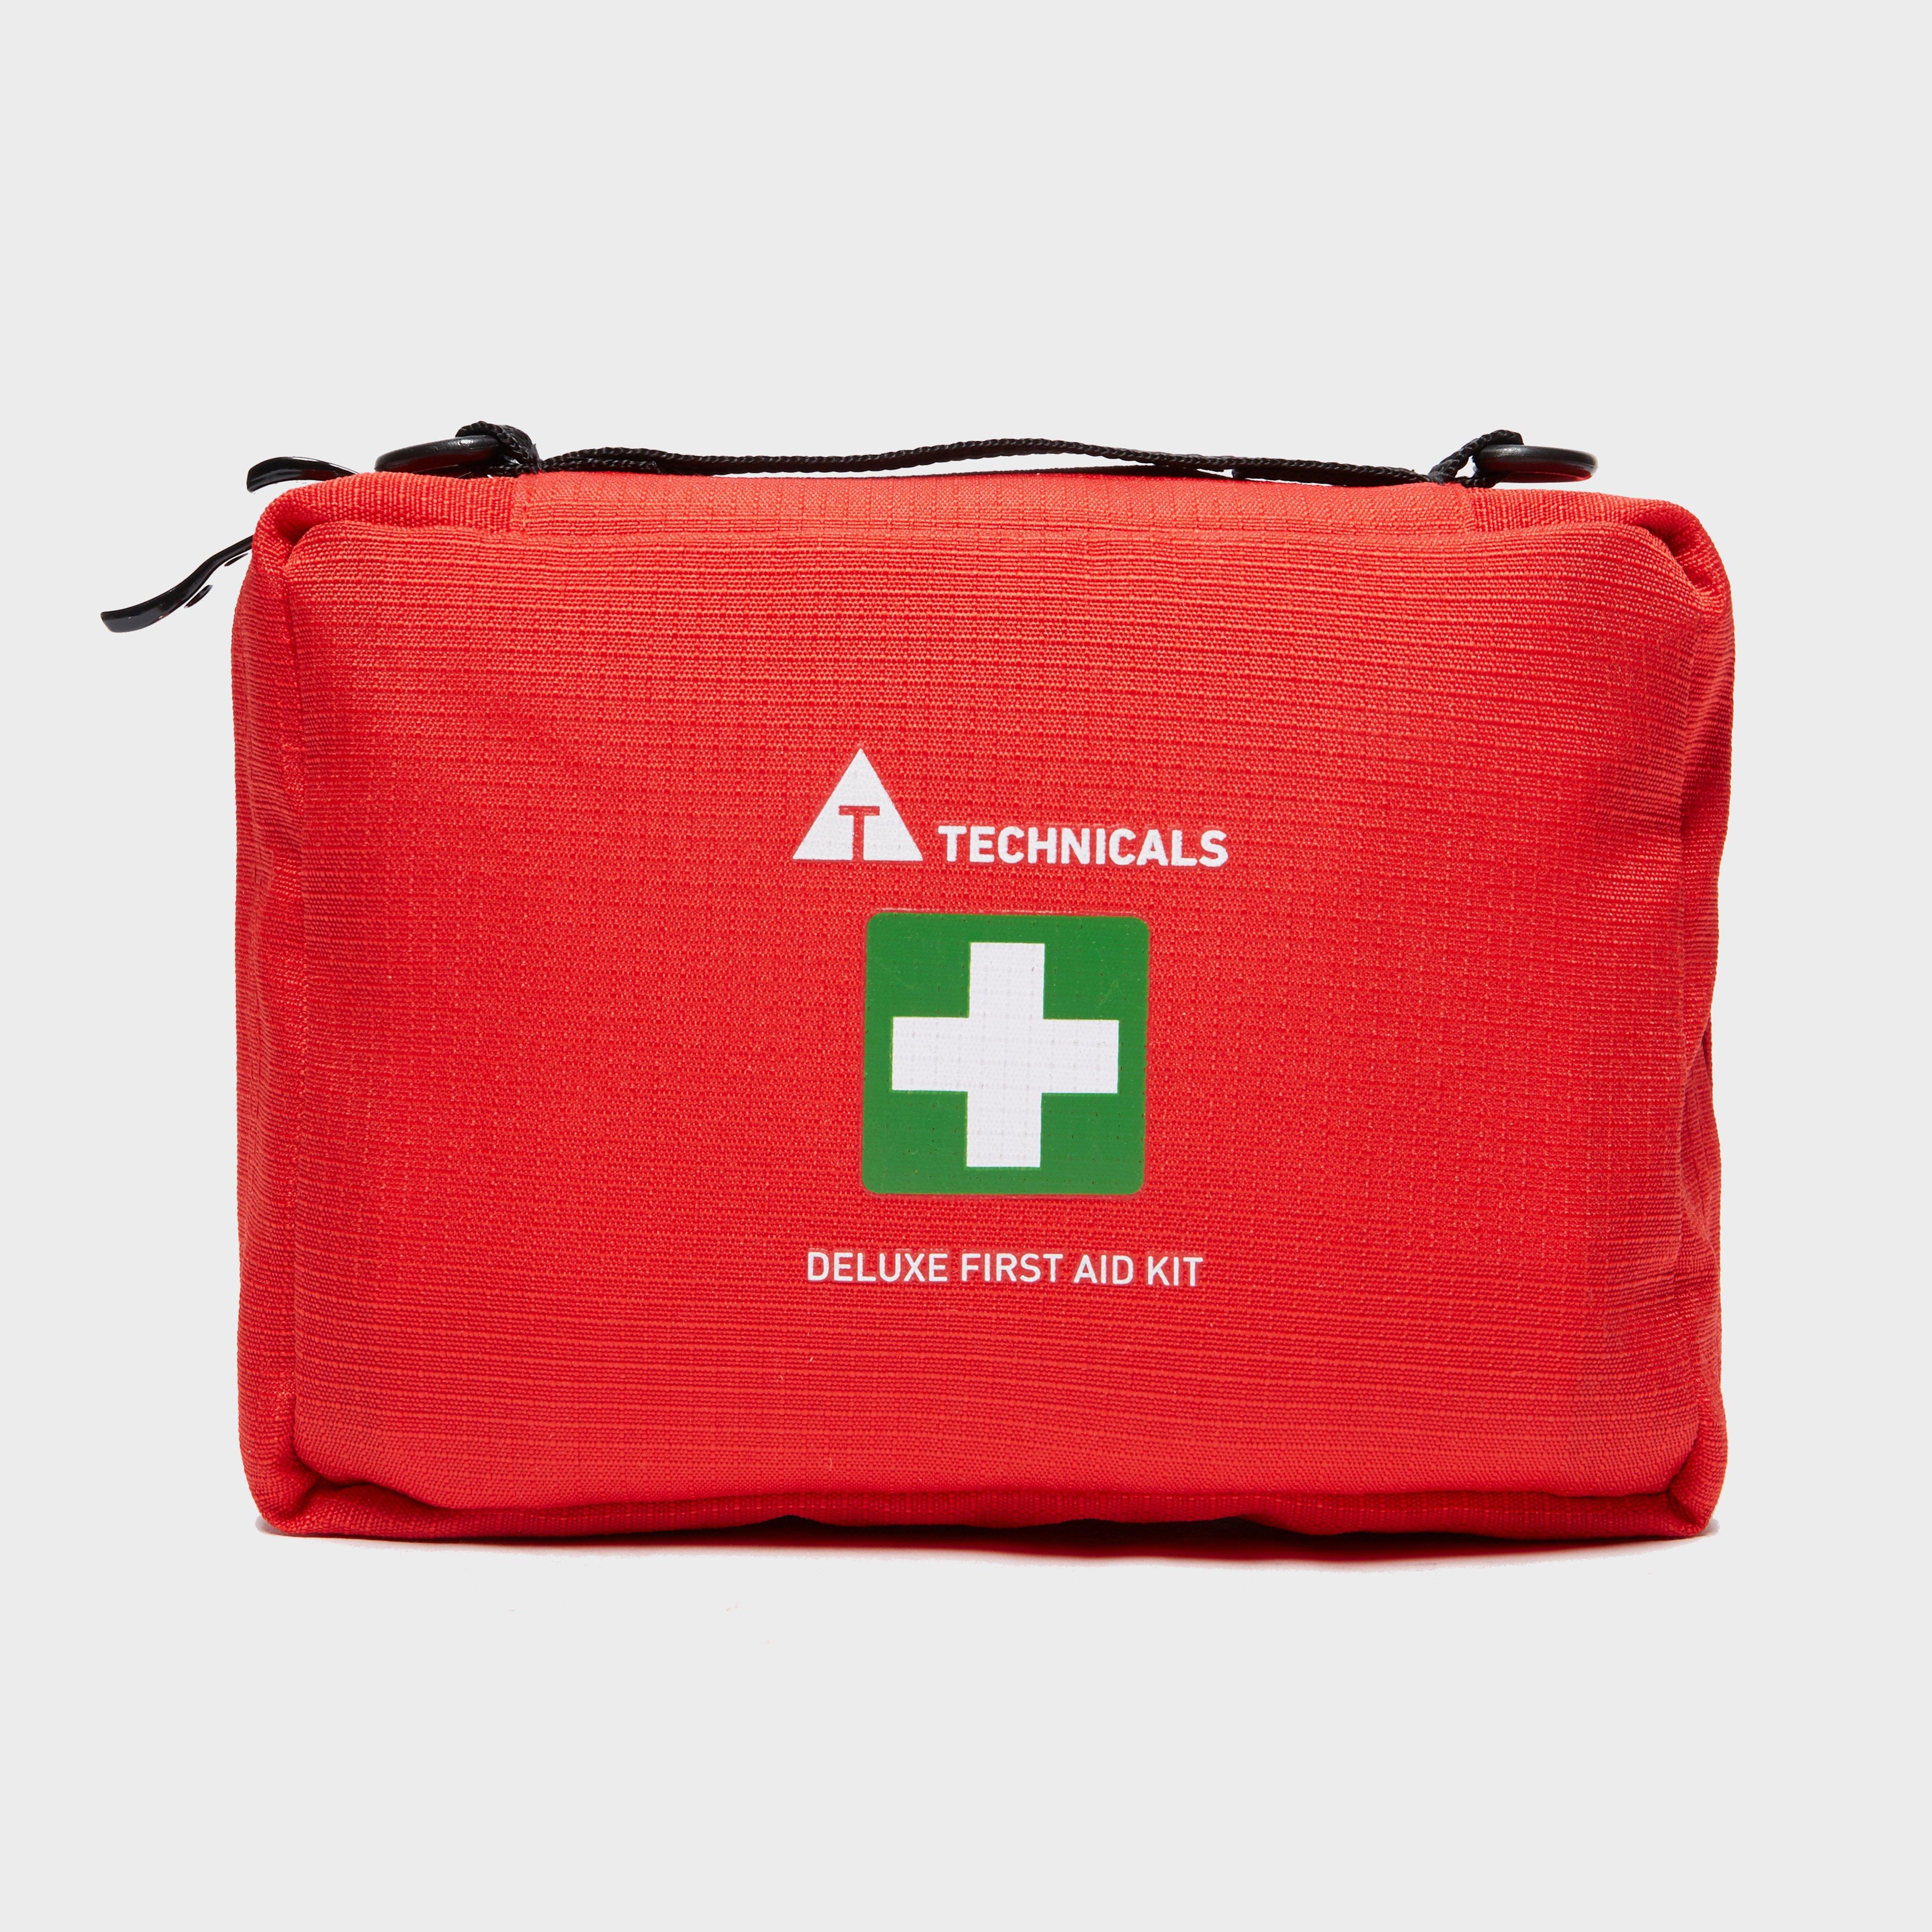 Image of Technicals Deluxe First Aid Kit - Red/Red, RED/RED